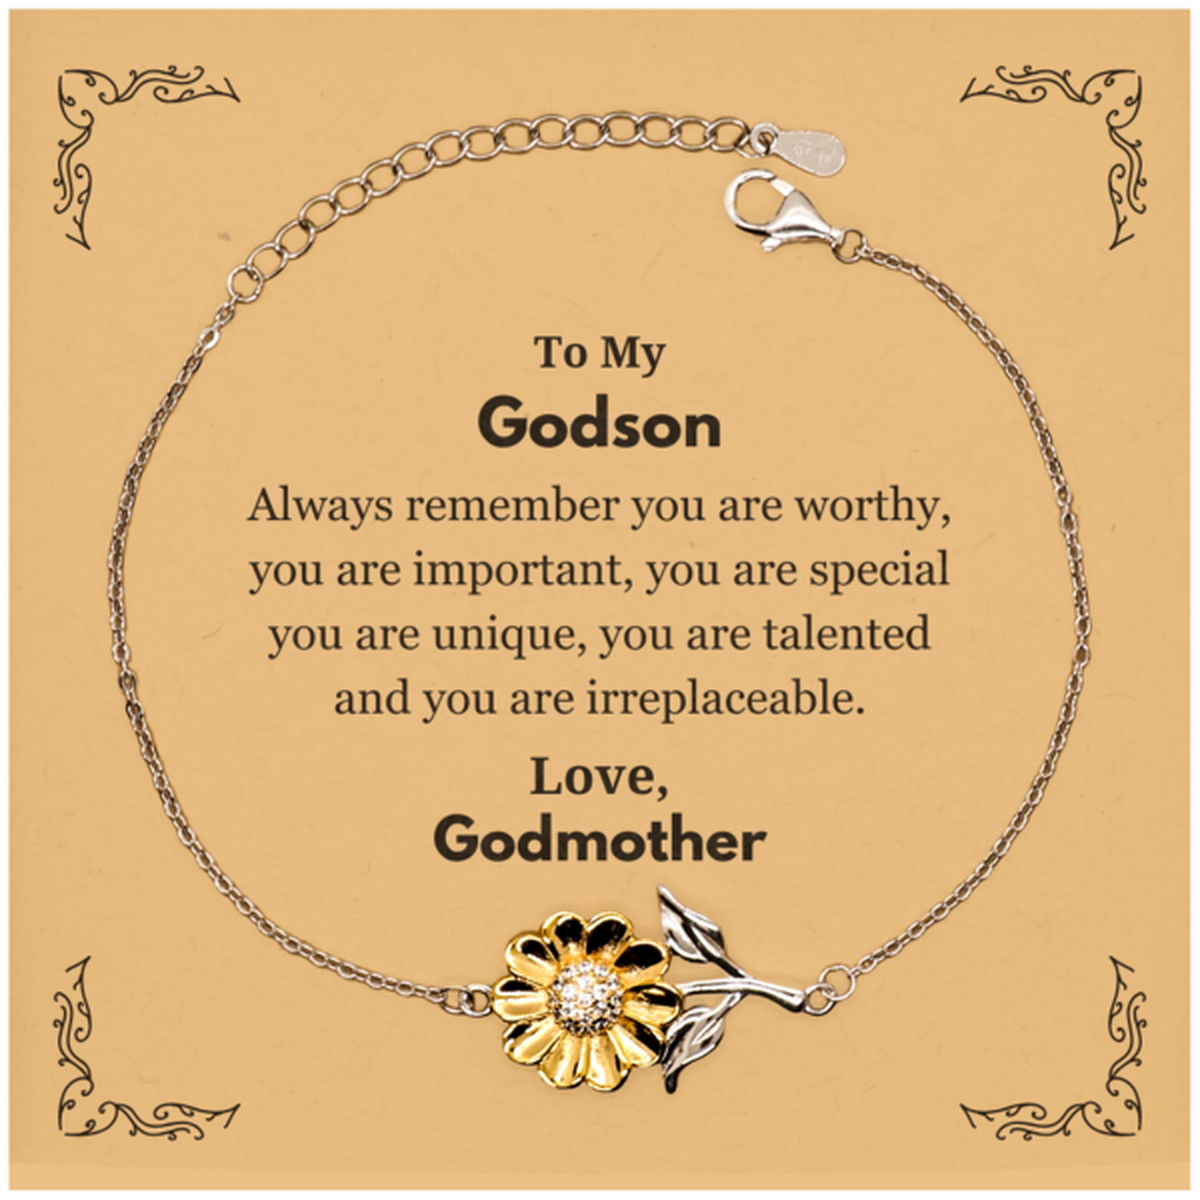 Godson Birthday Gifts from Godmother, Inspirational Sunflower Bracelet for Godson Christmas Graduation Gifts for Godson Always remember you are worthy, you are important. Love, Godmother